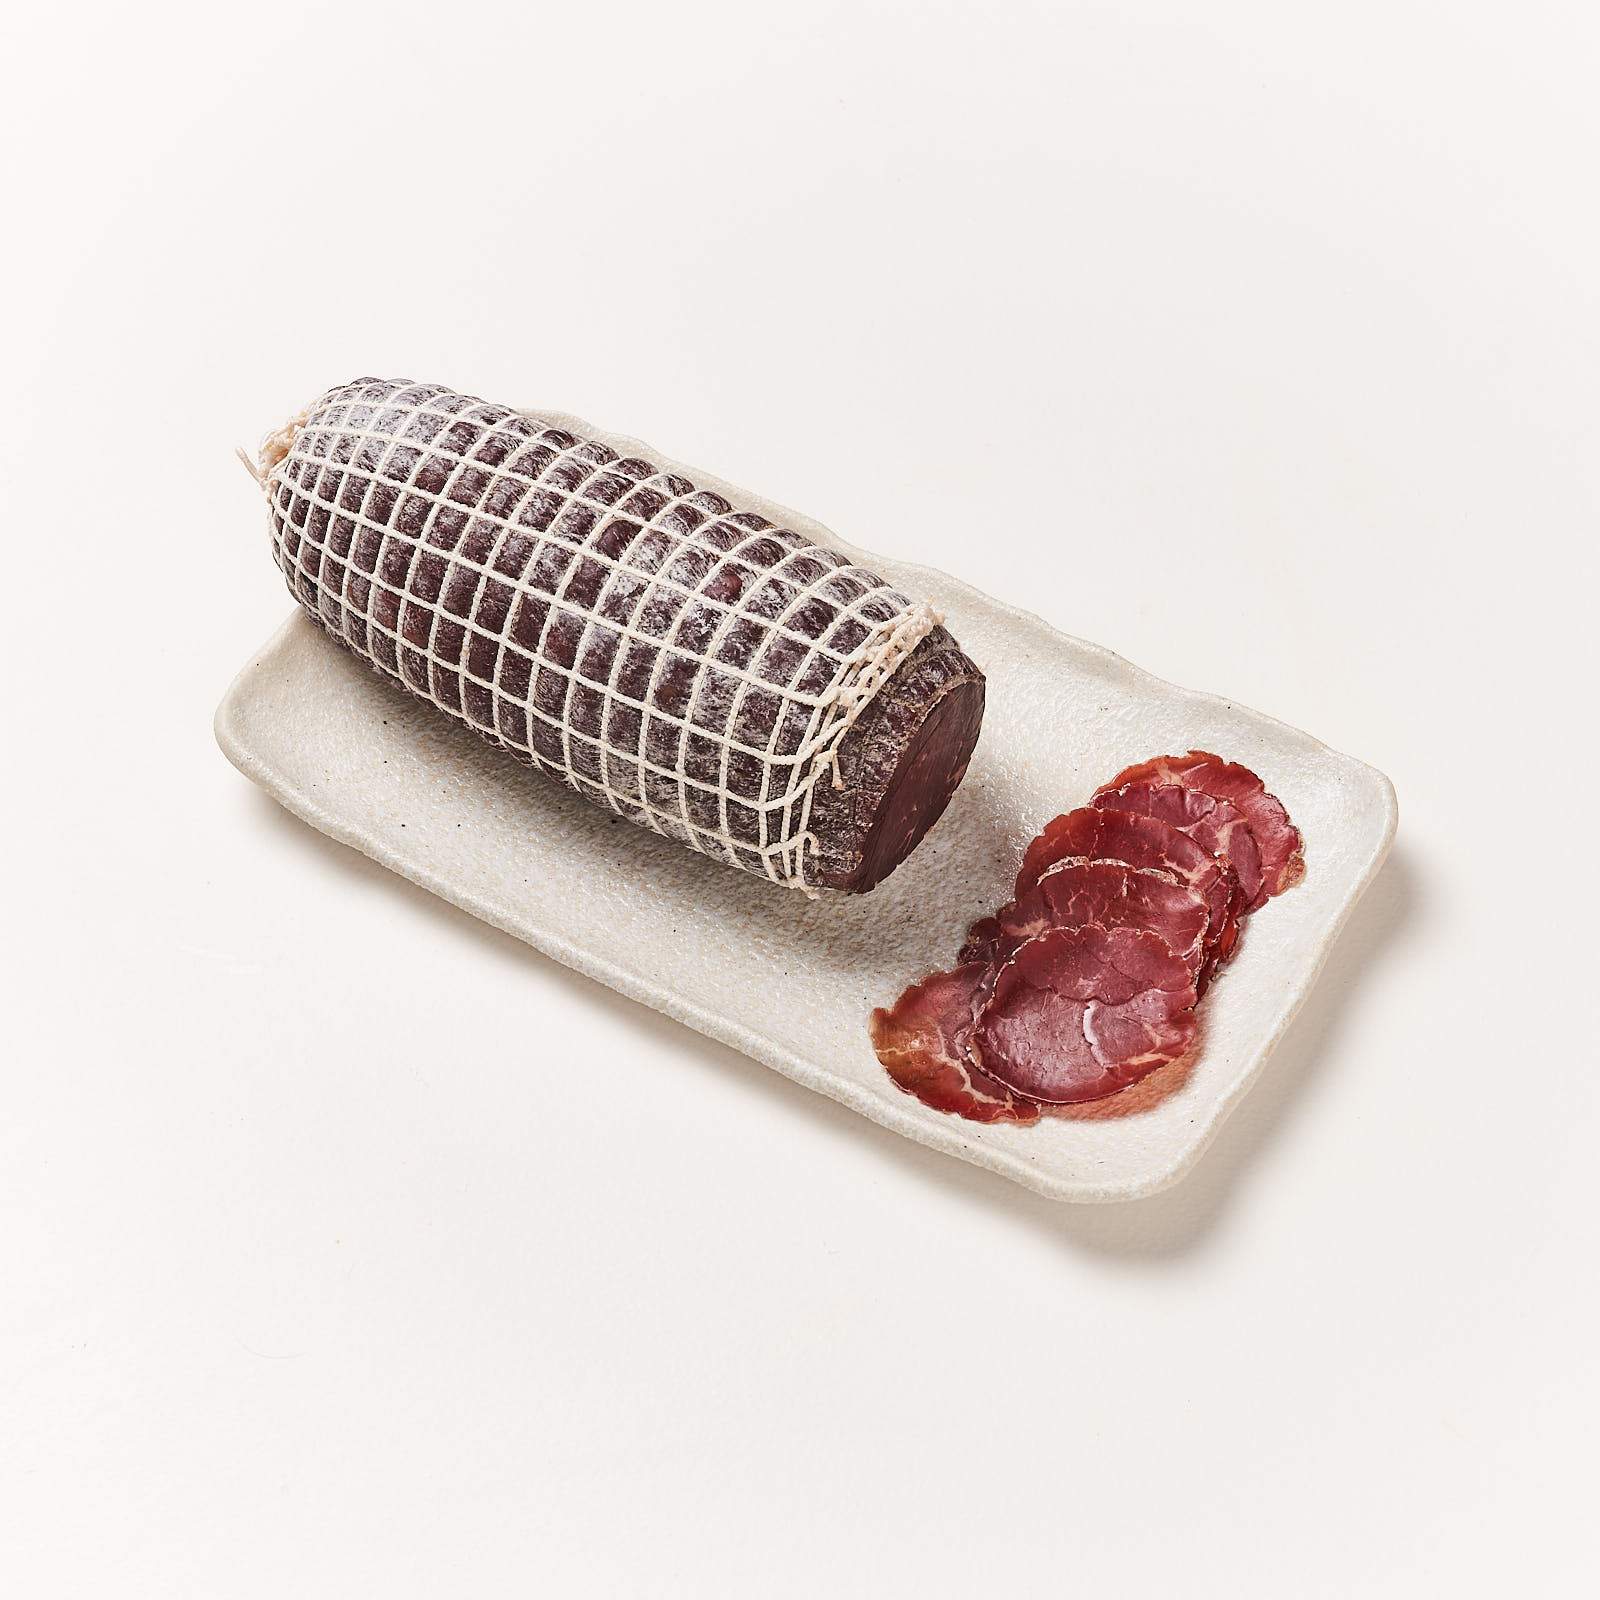 New to Hagen's : Small Batch Charcuterie